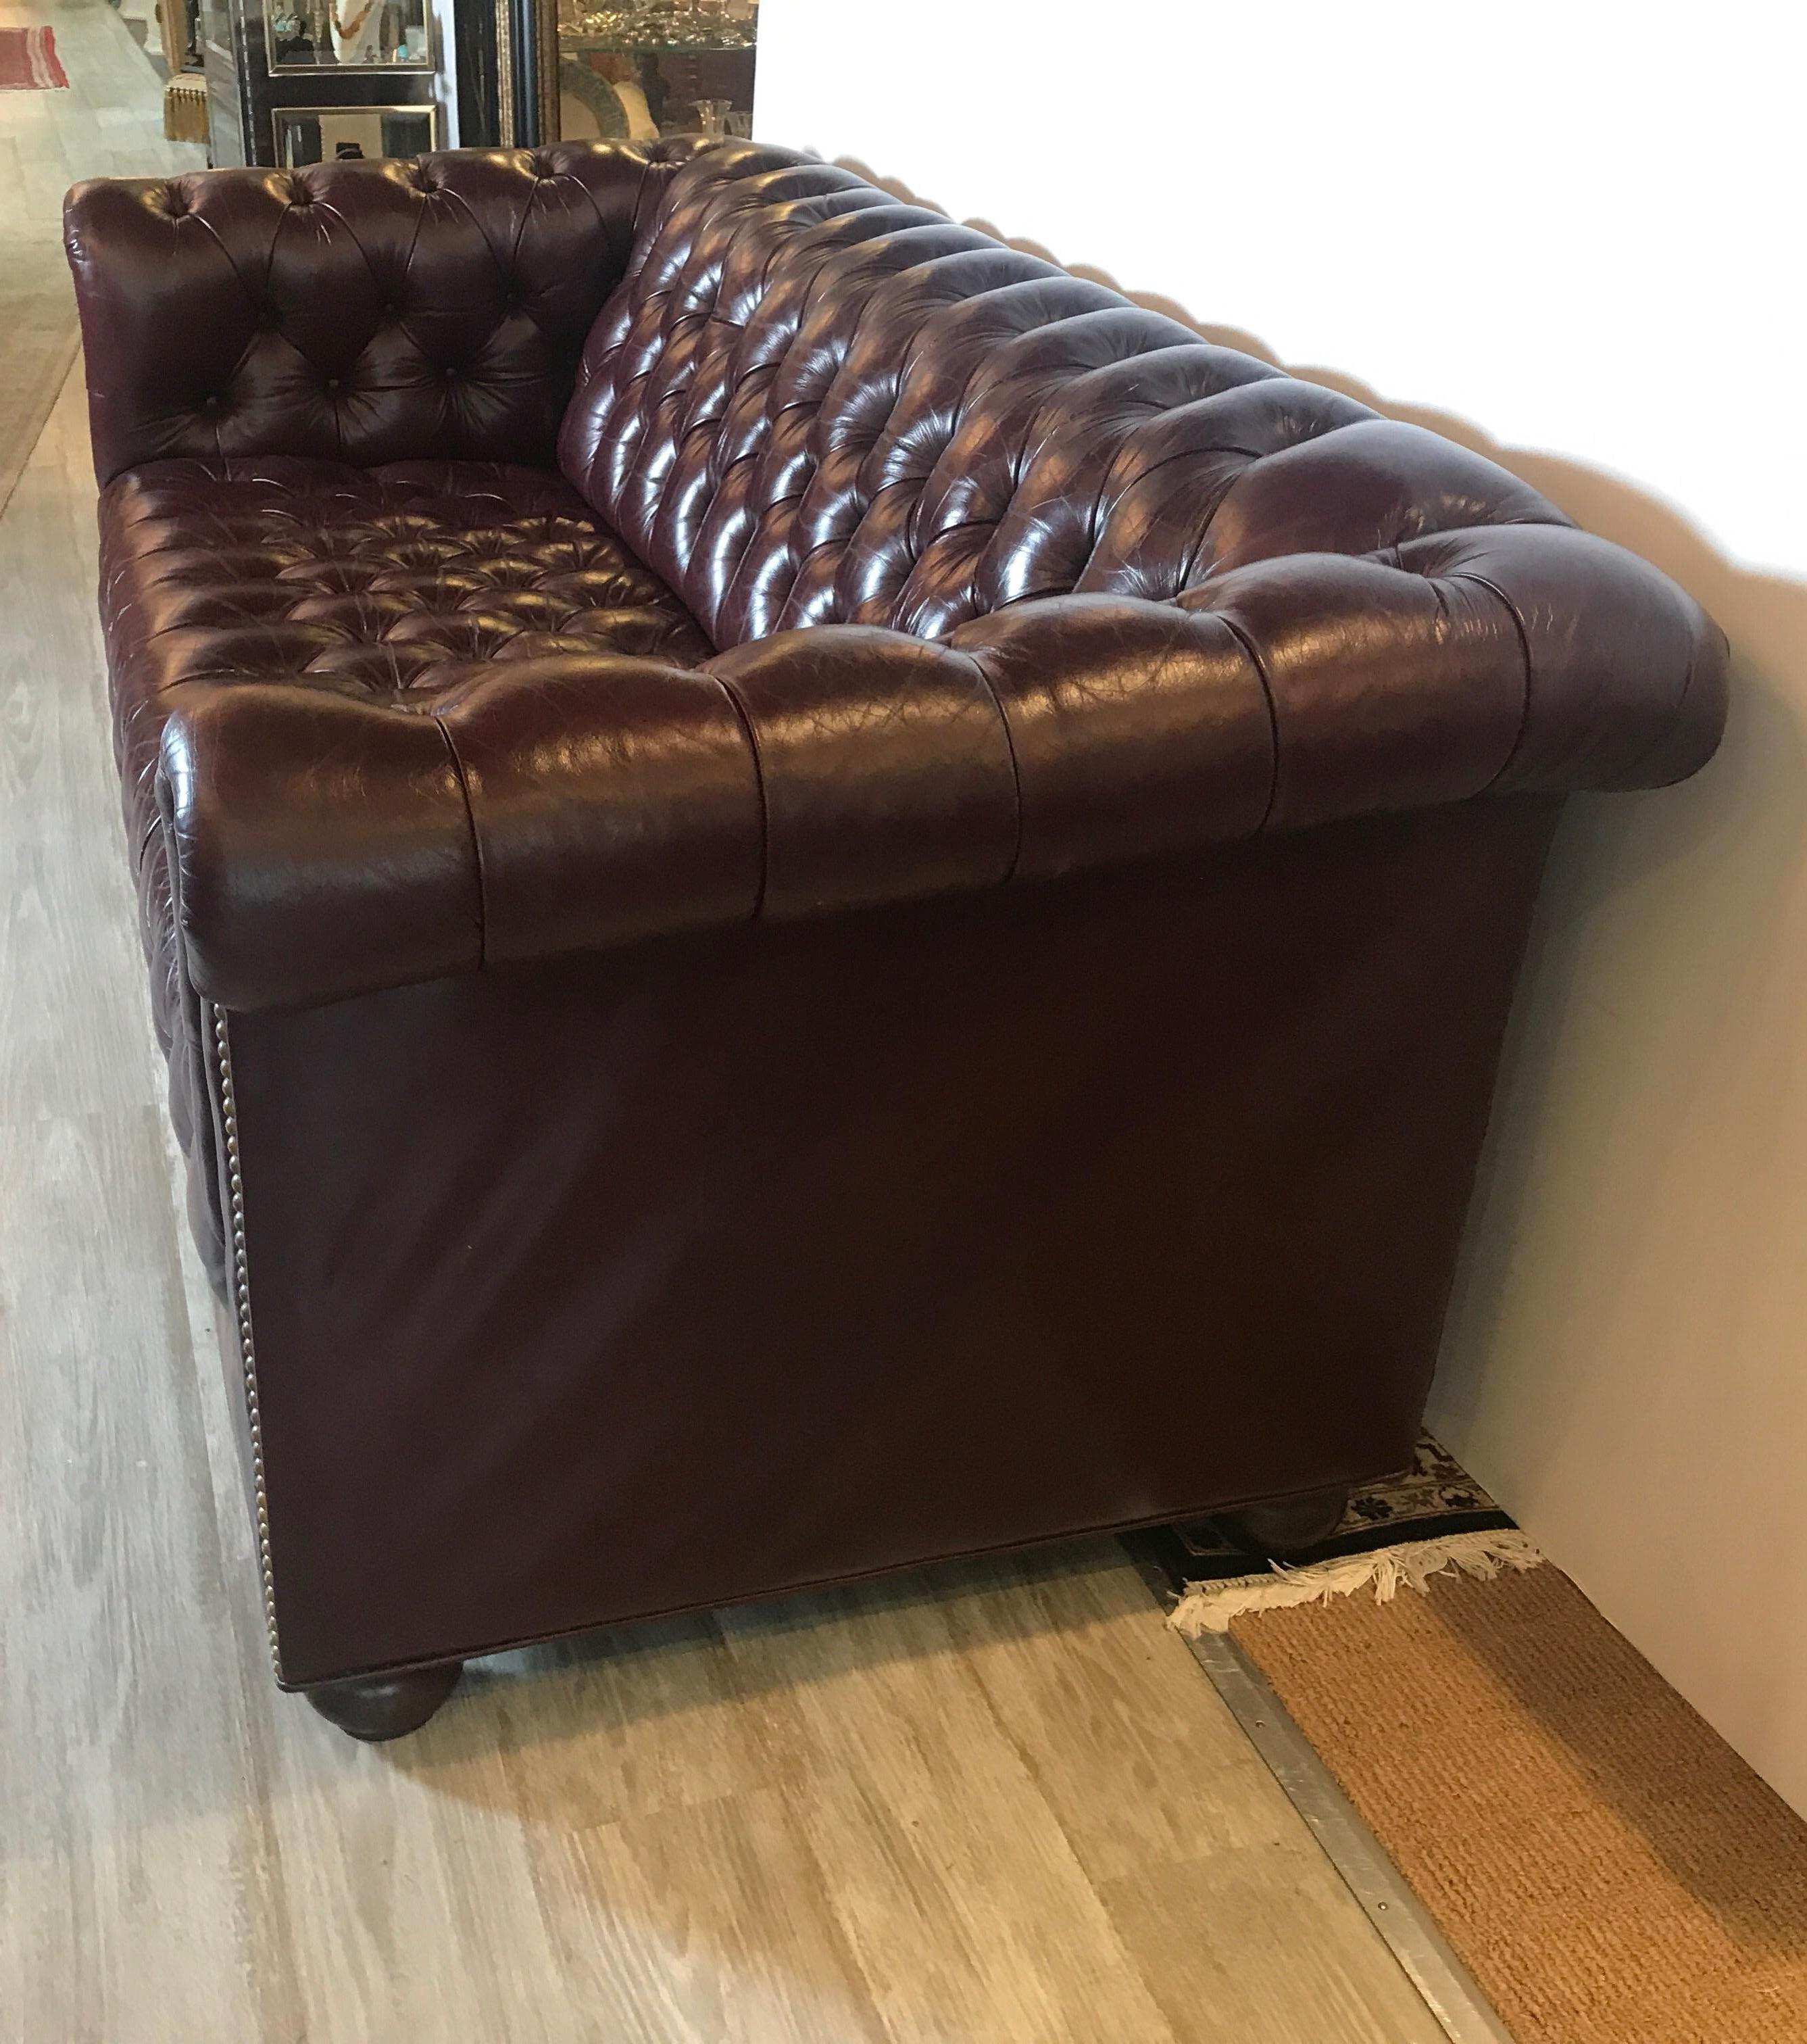 Late 20th Century English Leather Chesterfield Sofa